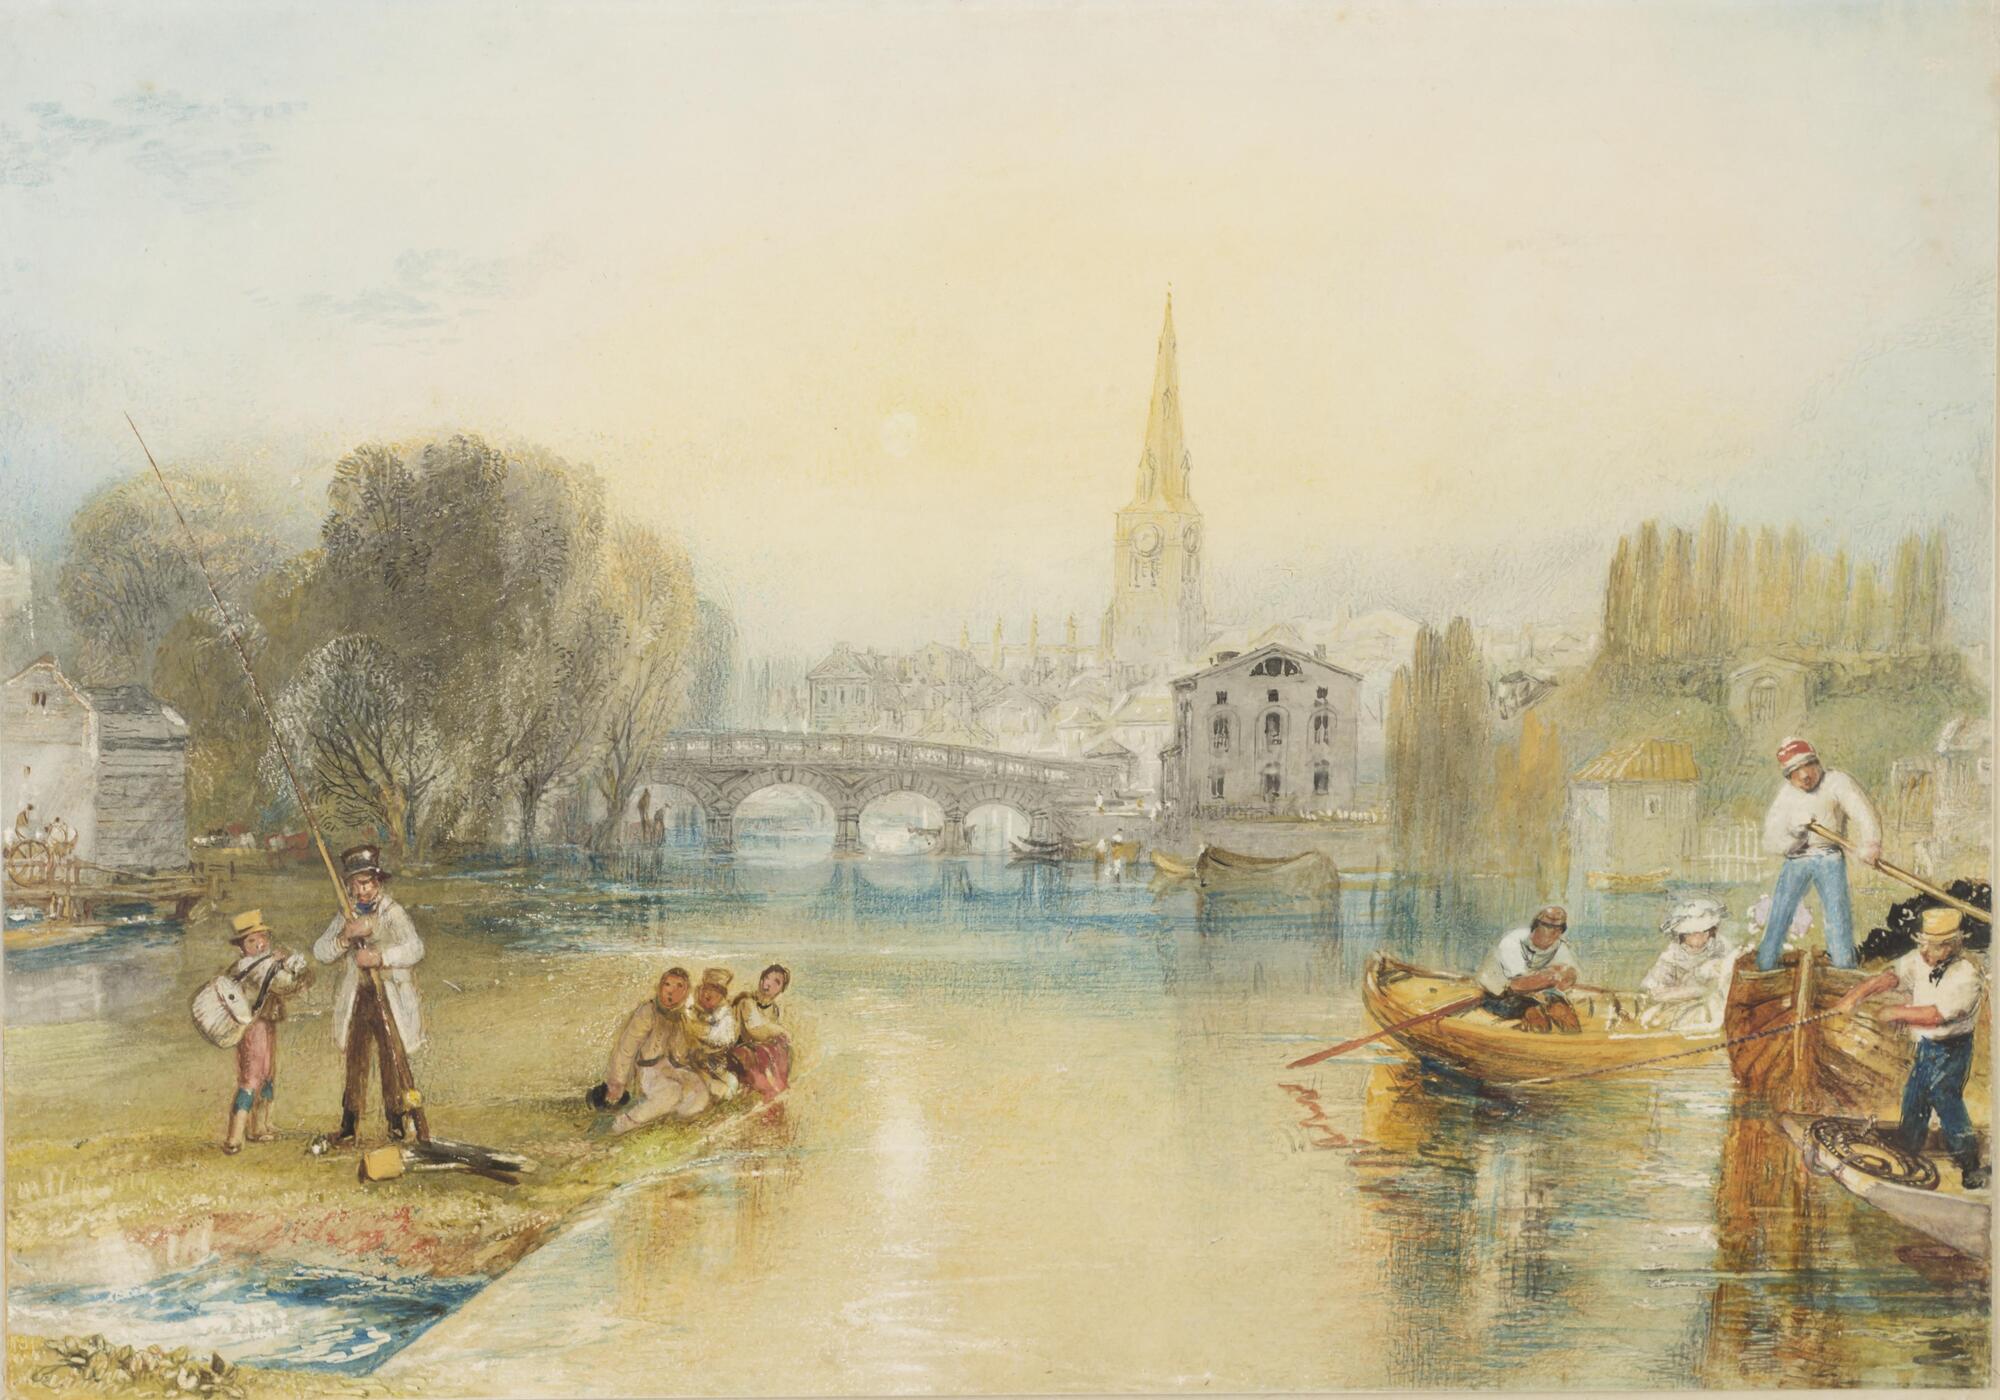 A river cuts through the middle of the composition, leading under a bridge in the background to the rising skyline of a city, with a church spire rising most prominently. In the left foreground, two men prepare to fish; in the right foreground, several boats are about to collide.